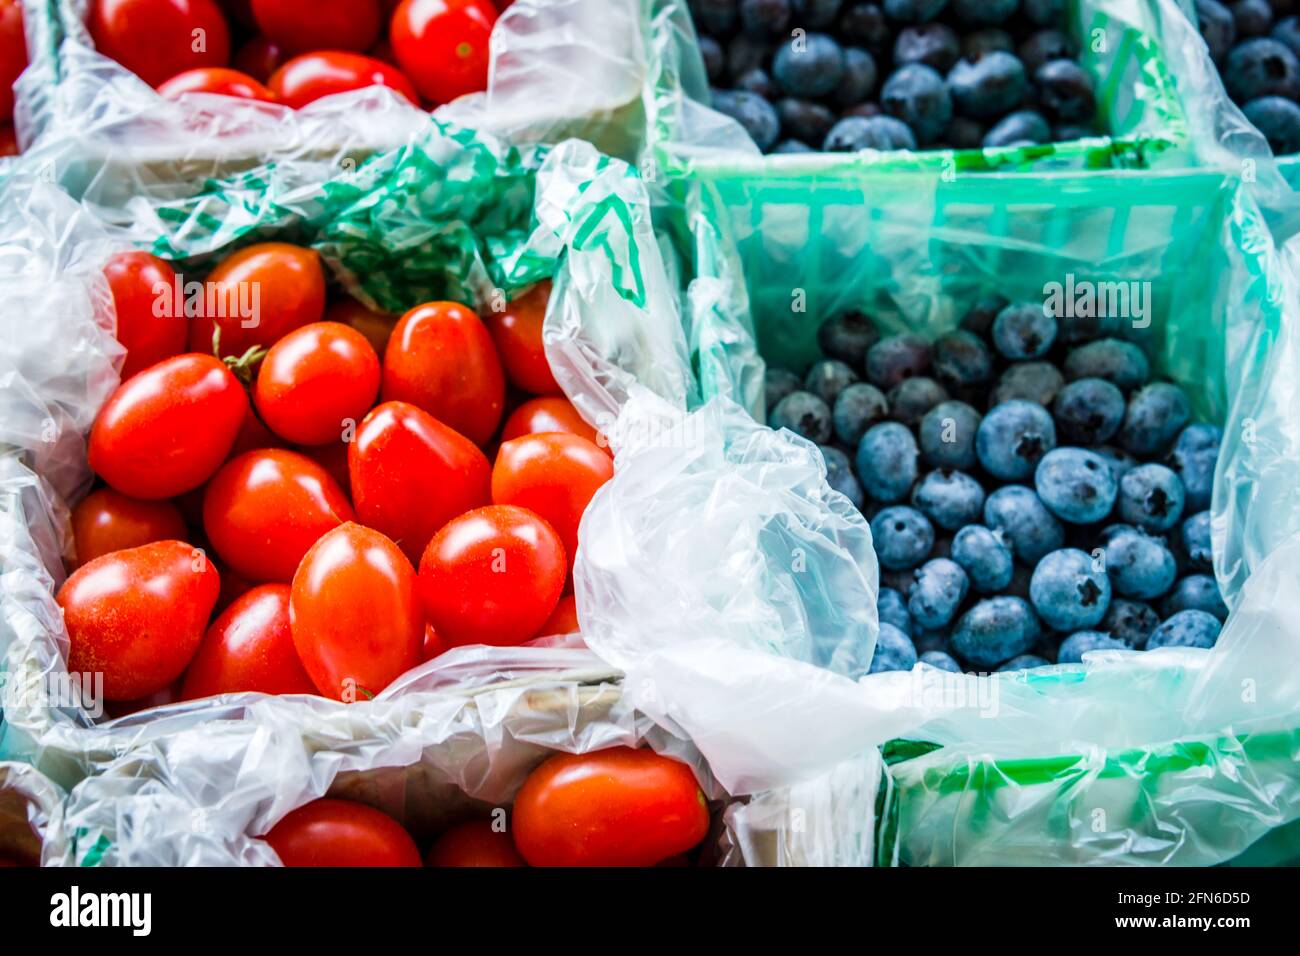 Georgia on My Mind - Union County Farmers Market - Baby Tomatoes & Blueberries Stock Photo